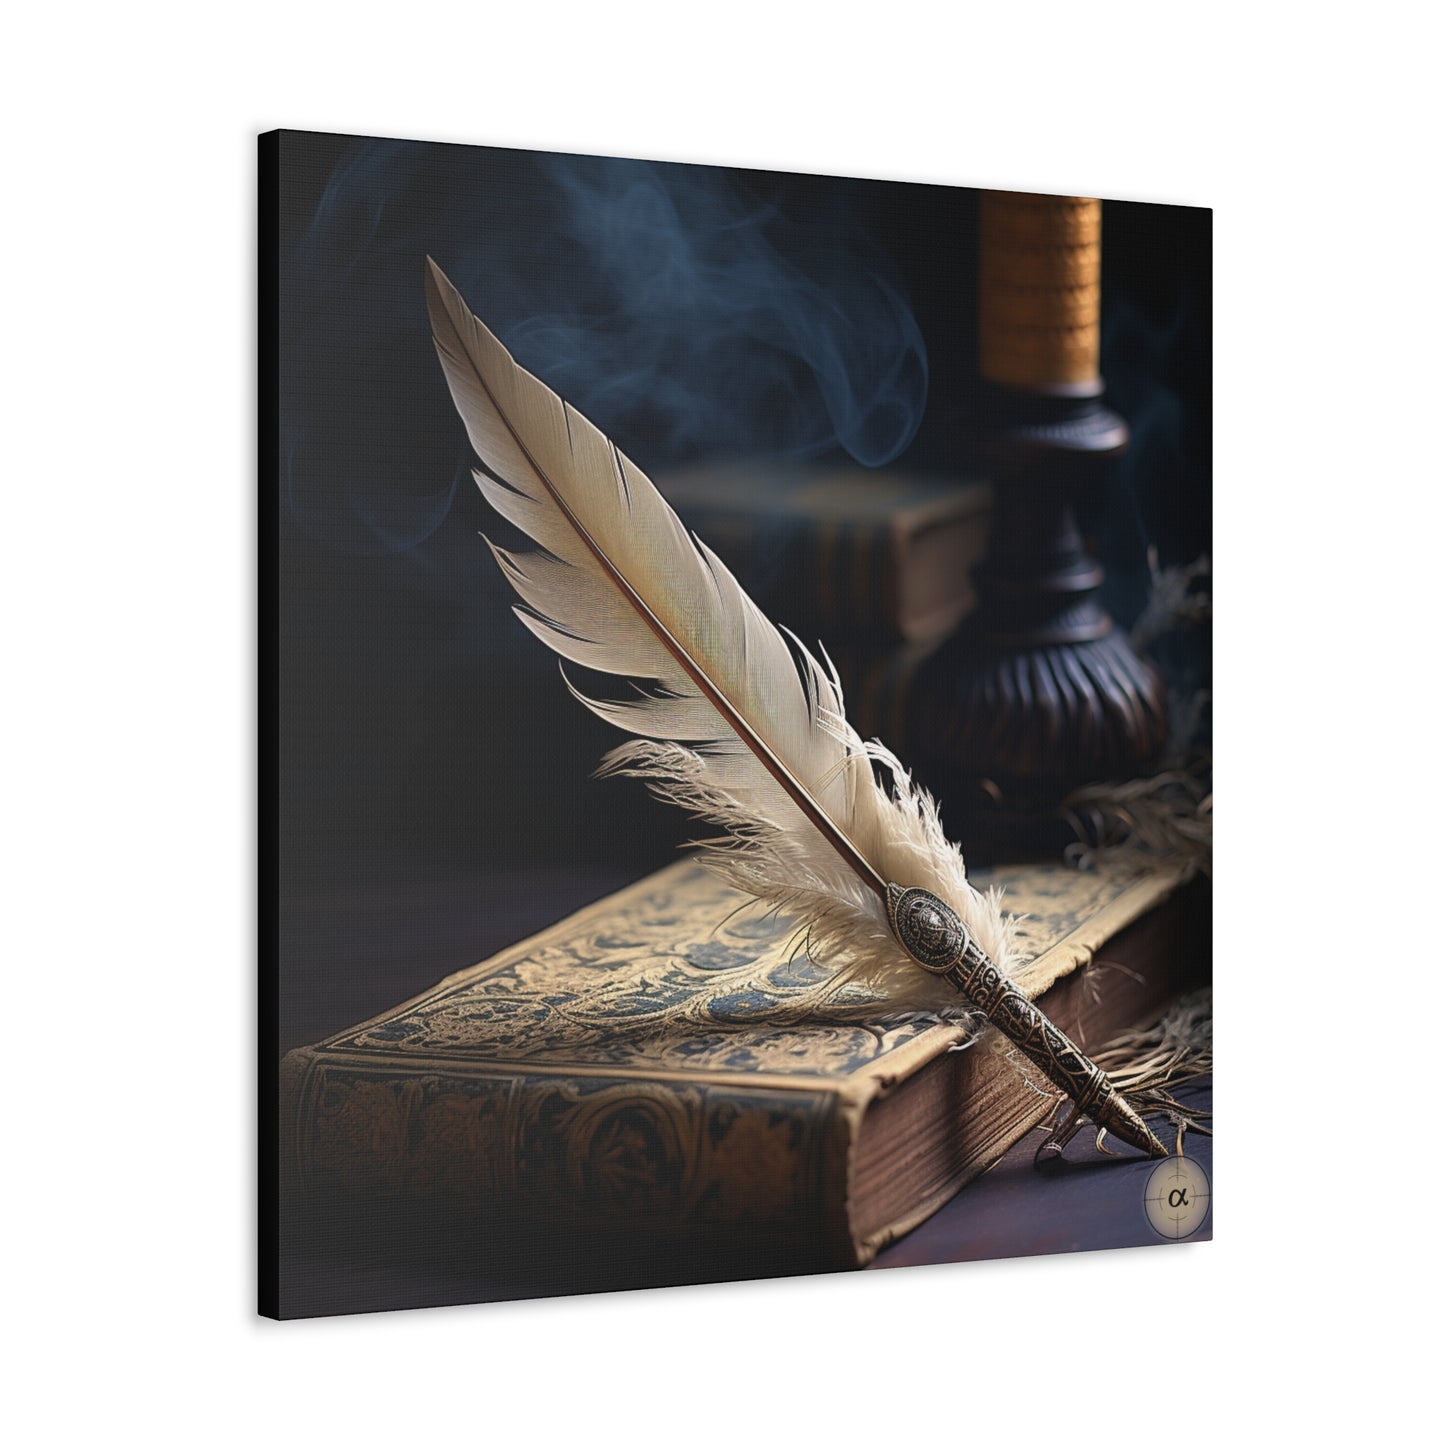 Art by Kendyll: "Quill and Journal" on Canvas